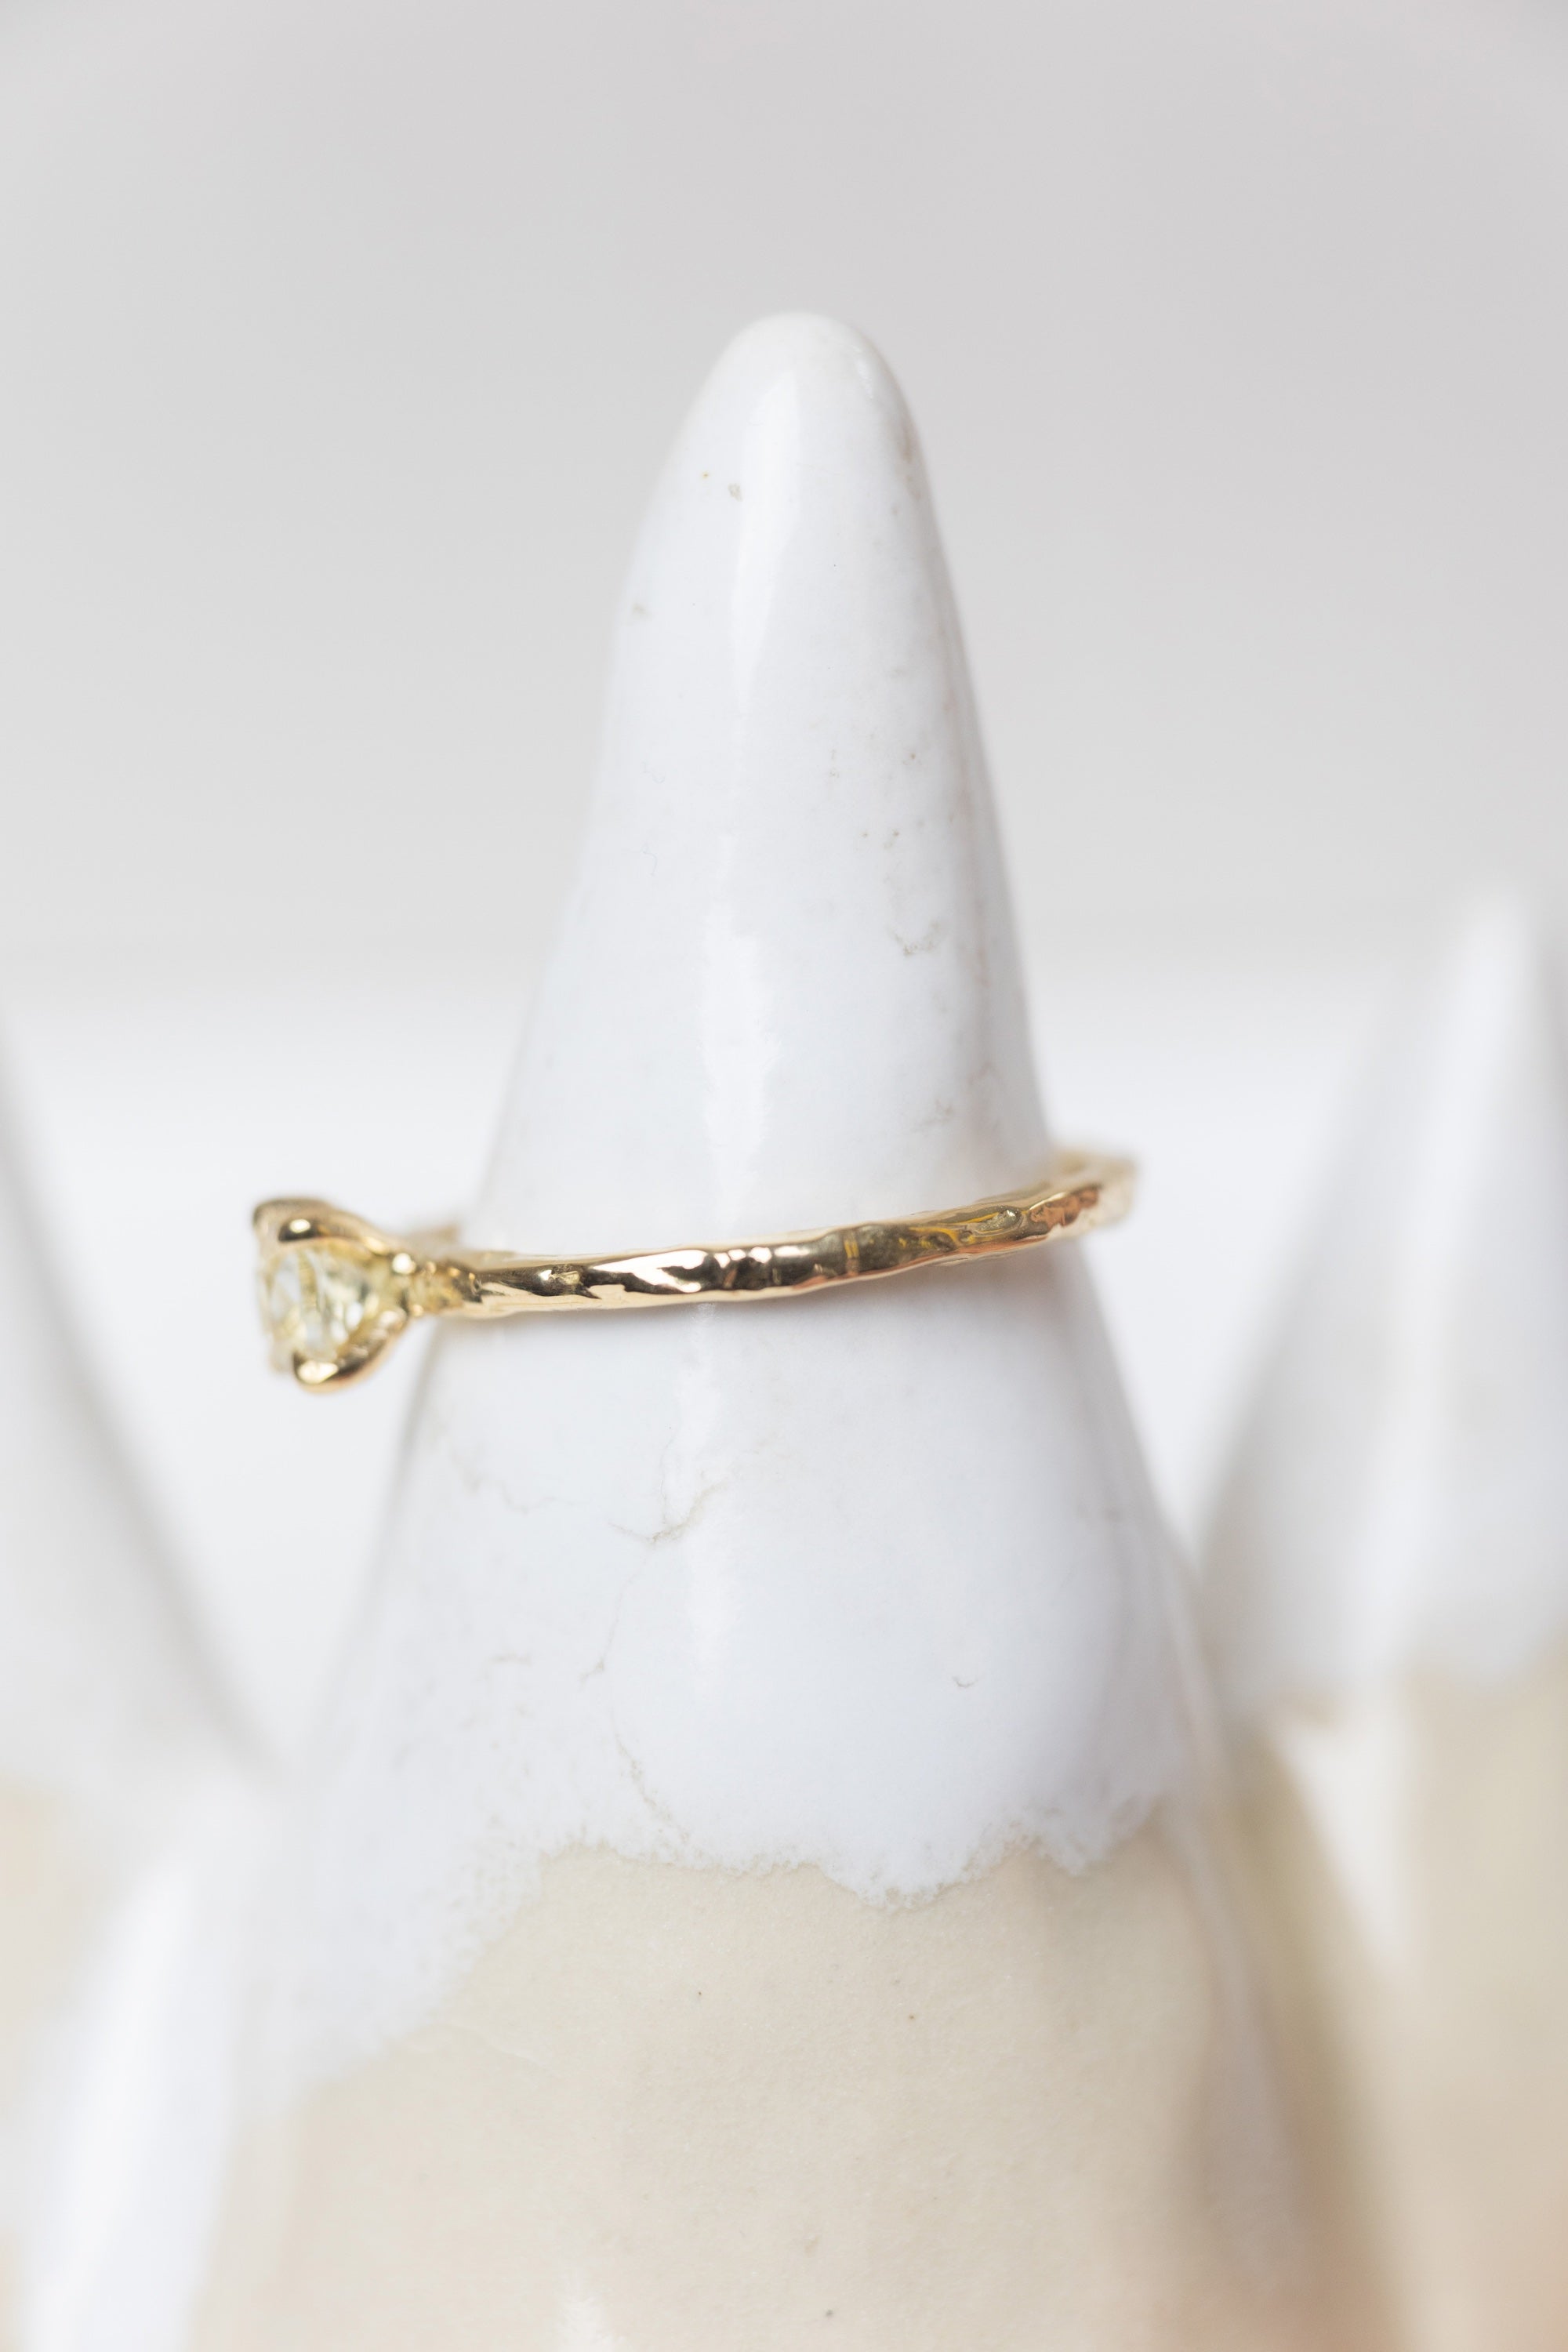 Leslie: Antique Diamond Ring on a 18k Textured Band